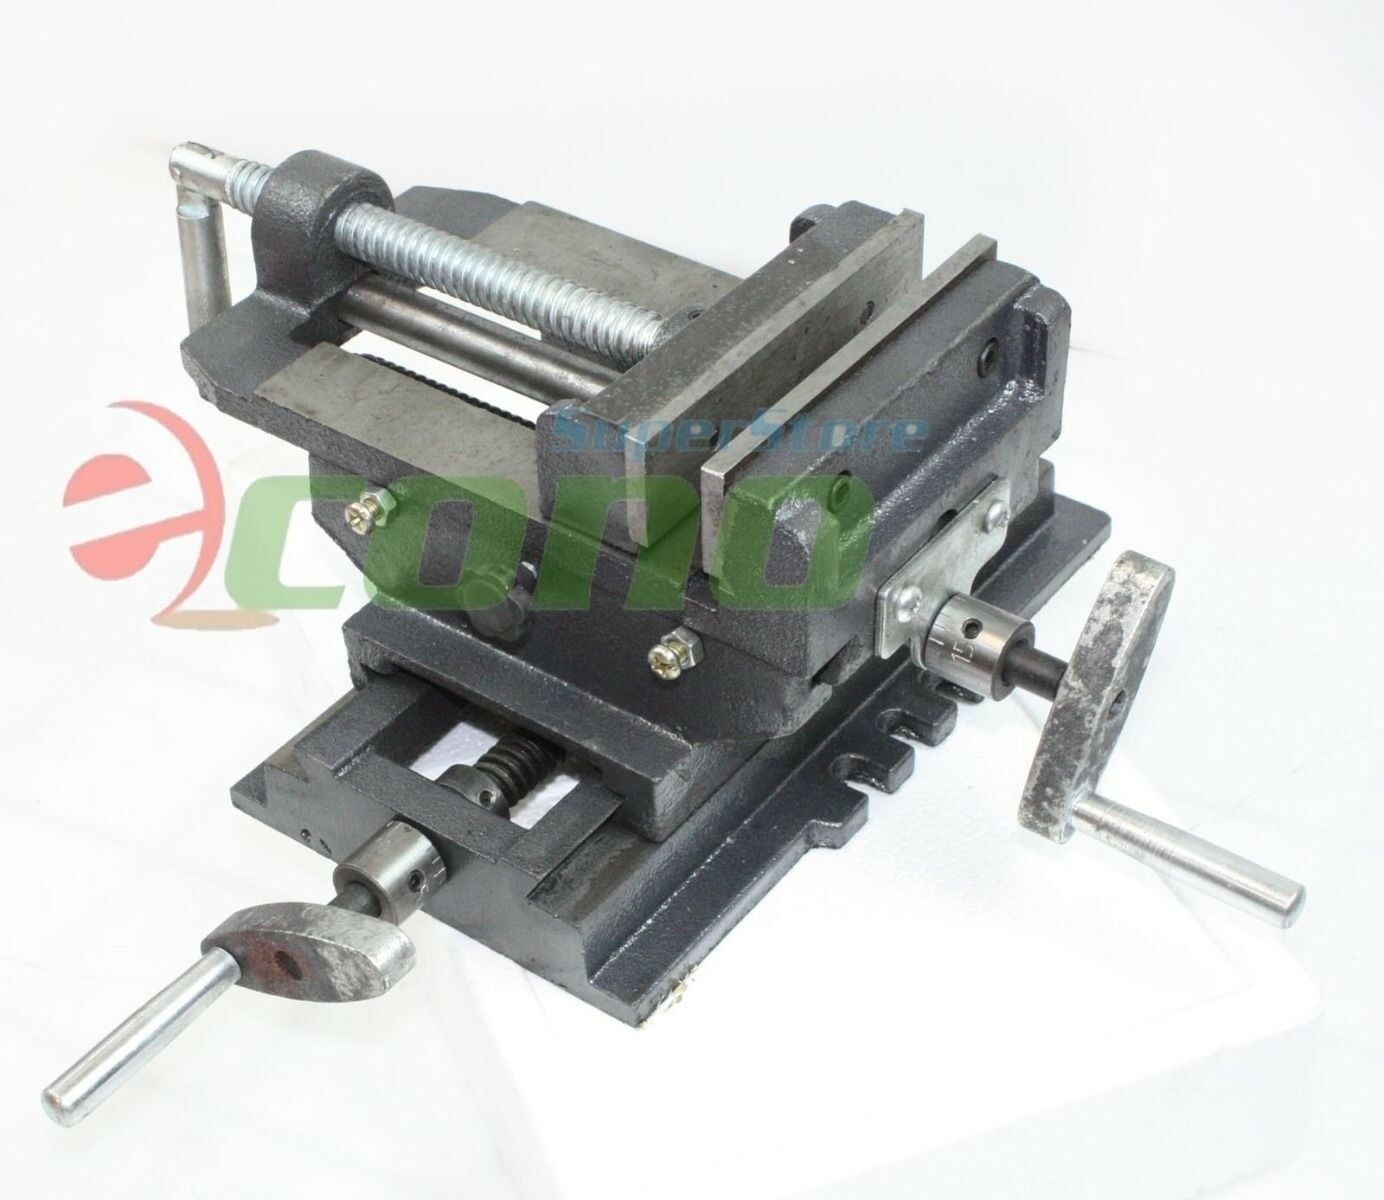 125mm Compound Drill Vice,2 Way Slide,Metal Milling Machine Holding Clamp-83525 